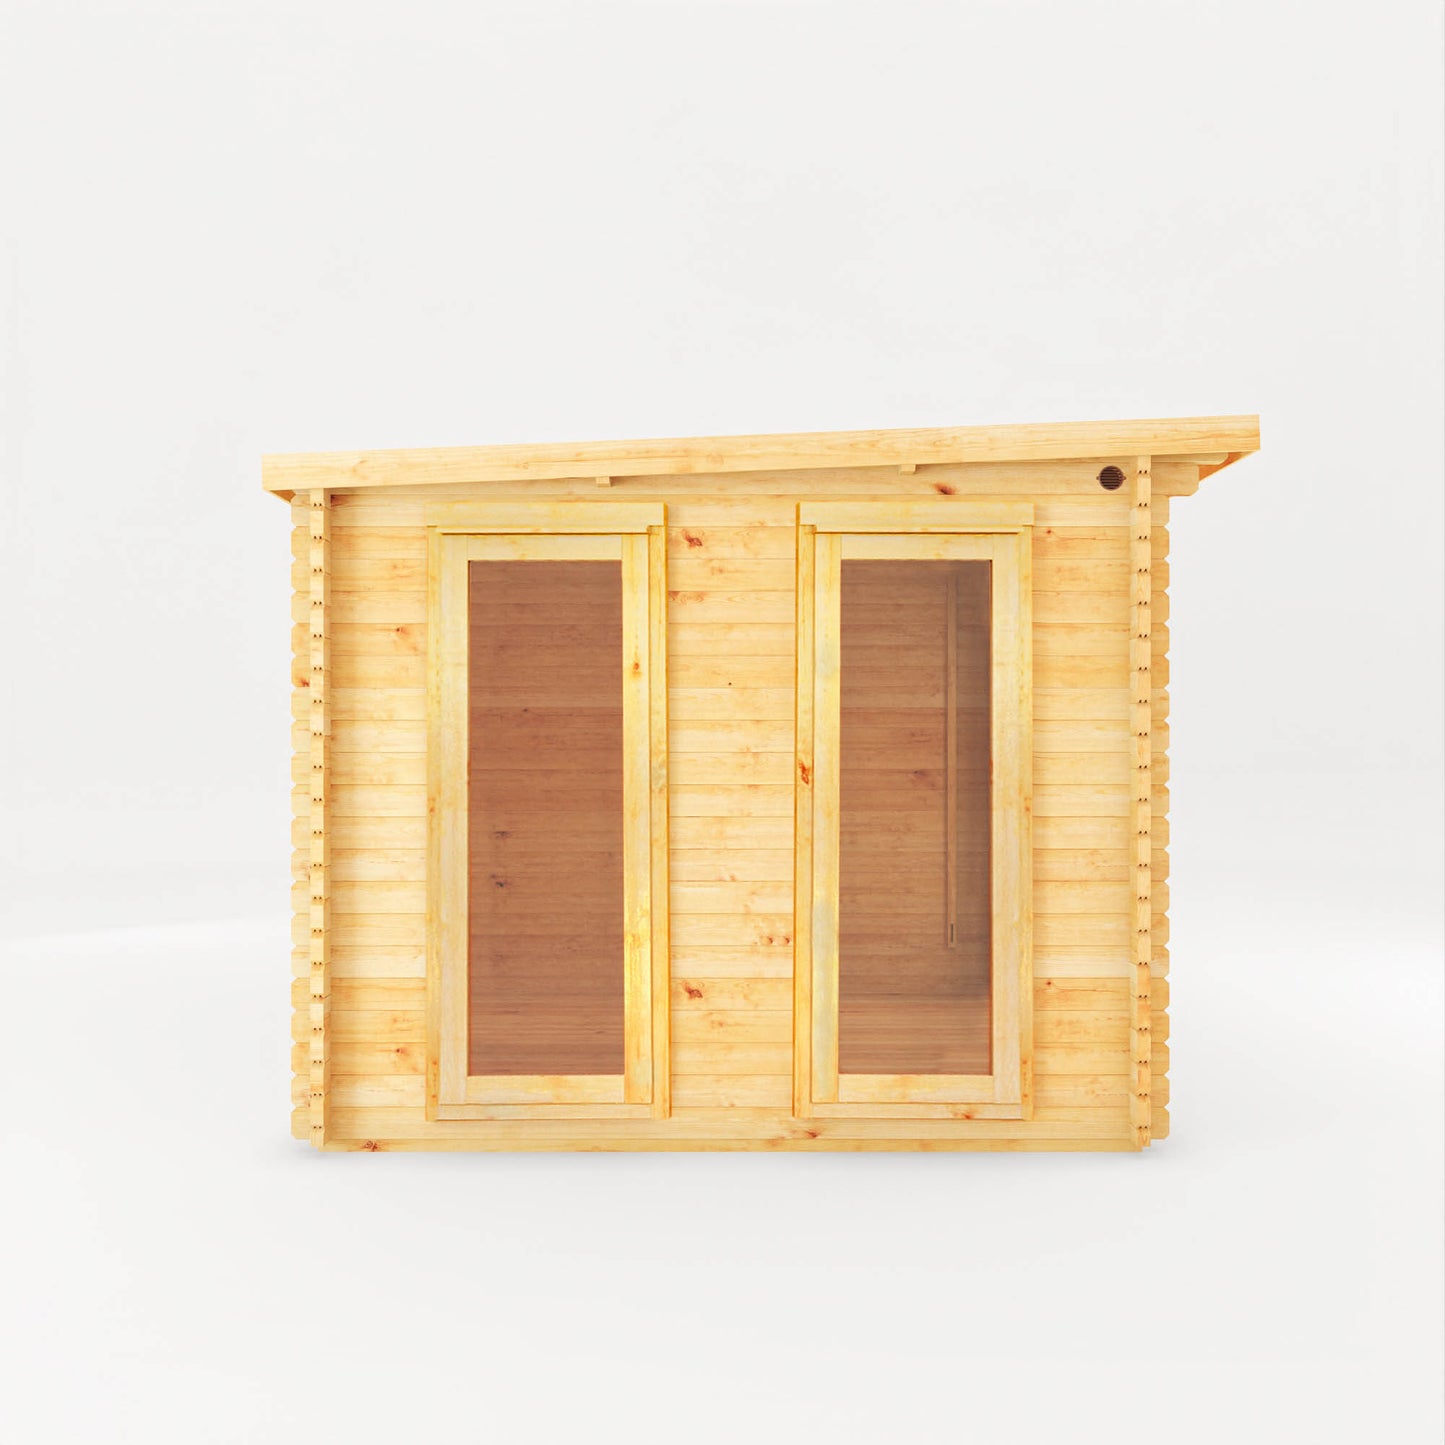 The 6m x 3m Wren Log Cabin with Slatted Area